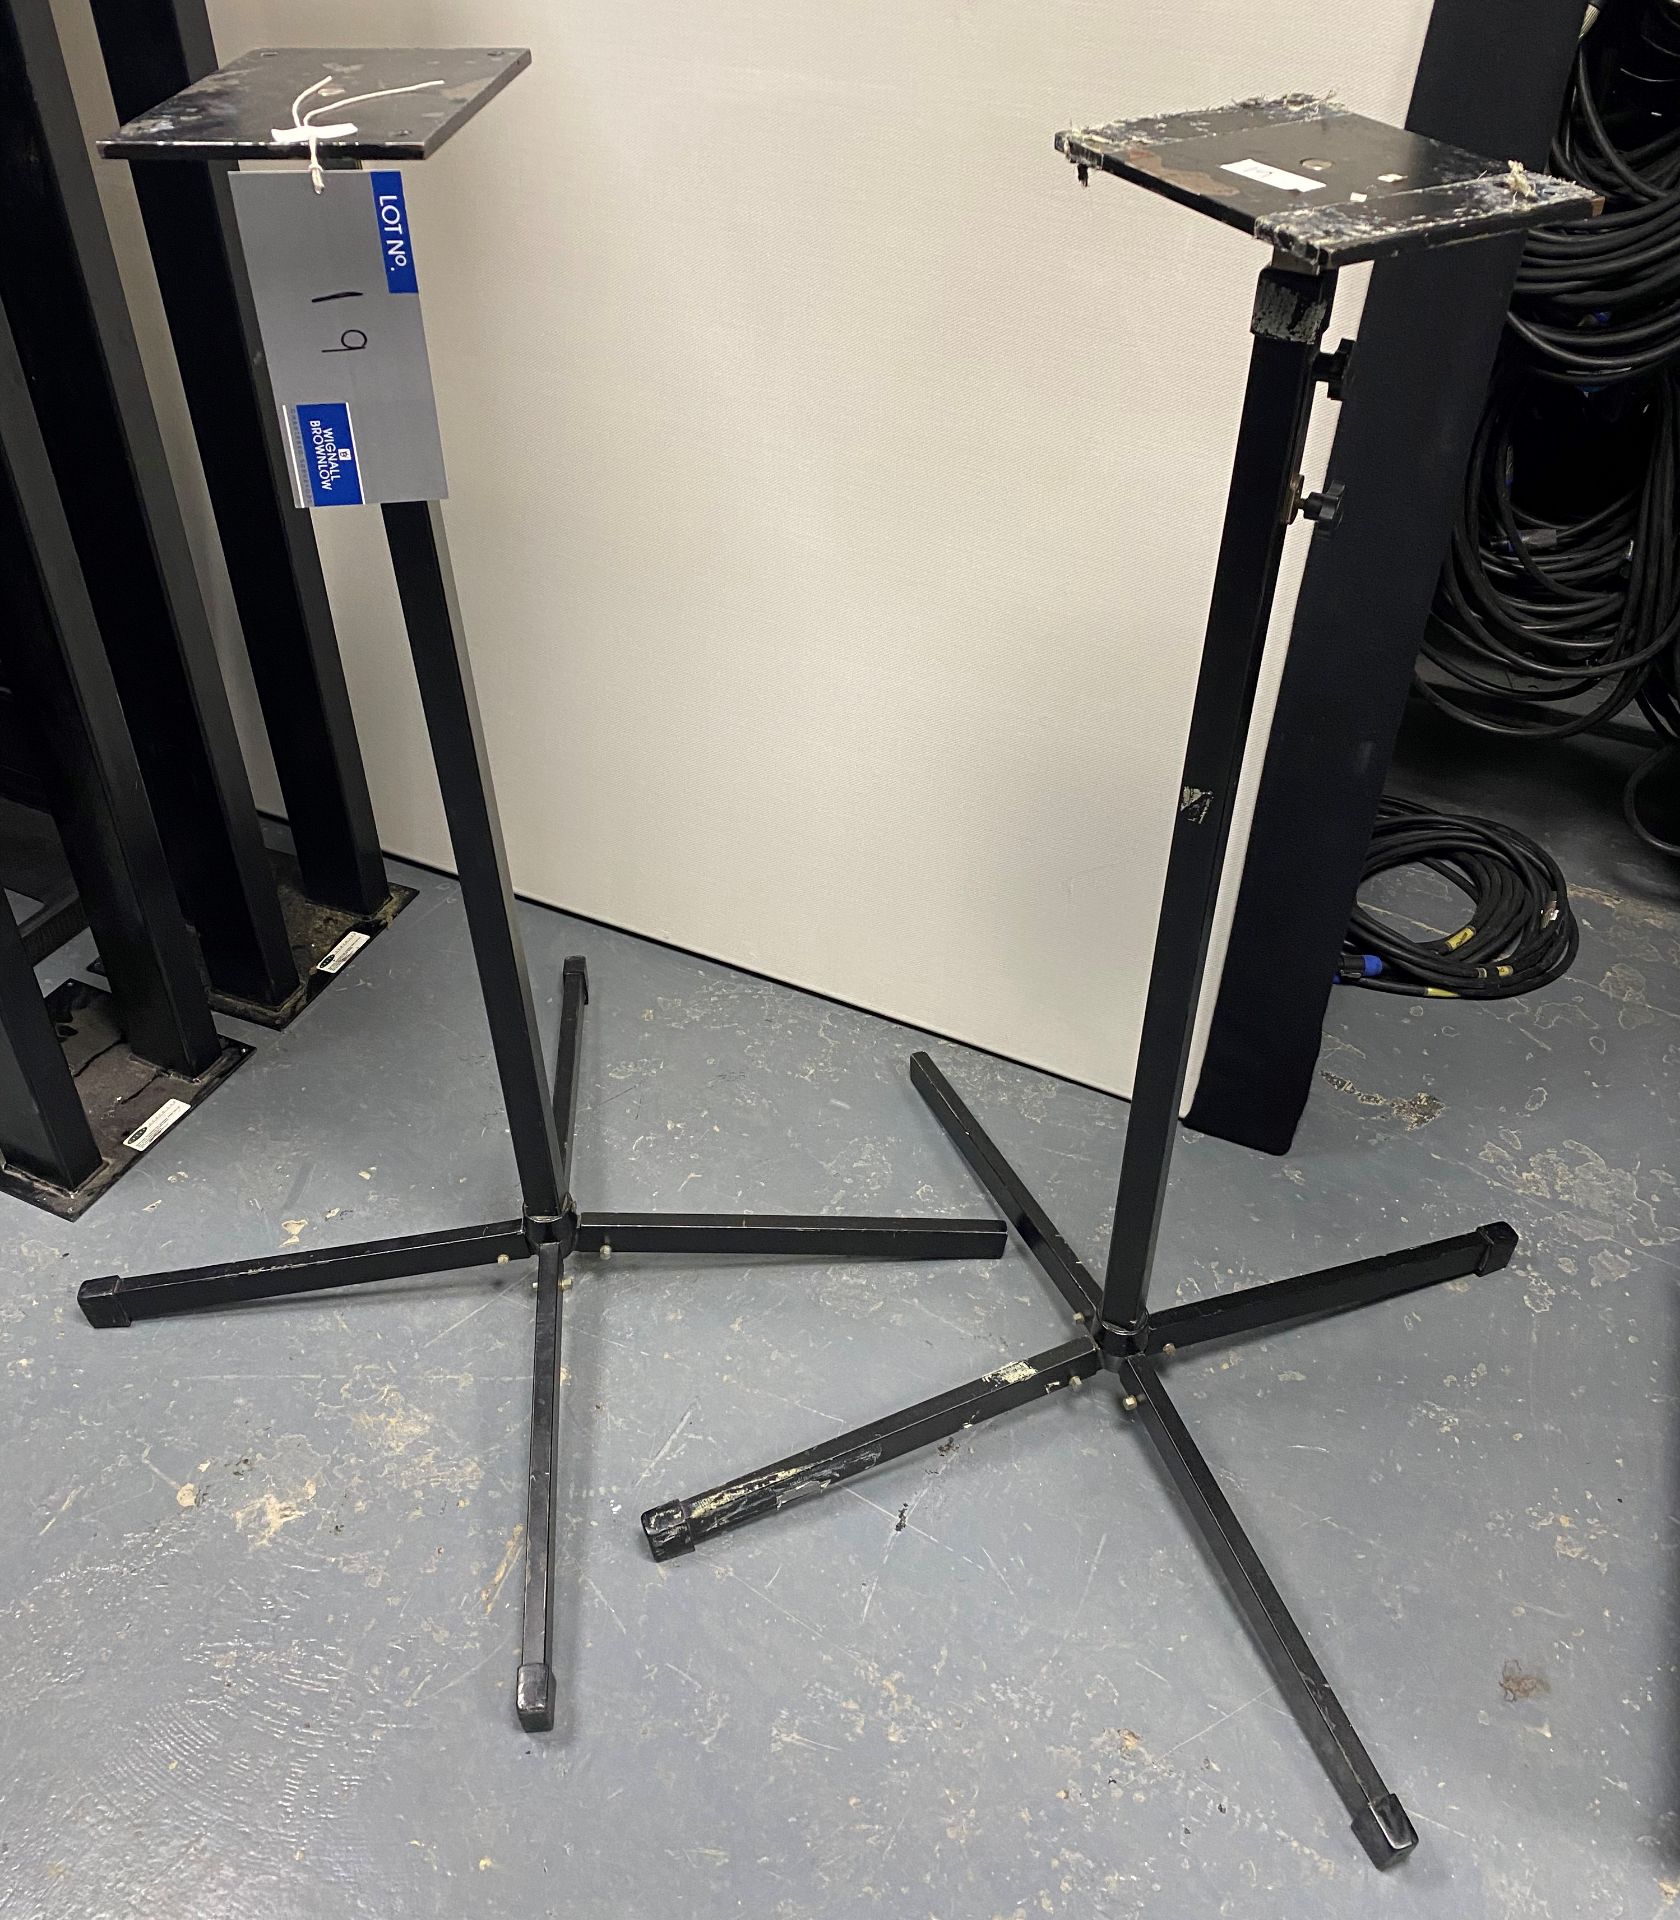 A Pair of Adjustable Height Speaker Stands, 1.2m min. height.